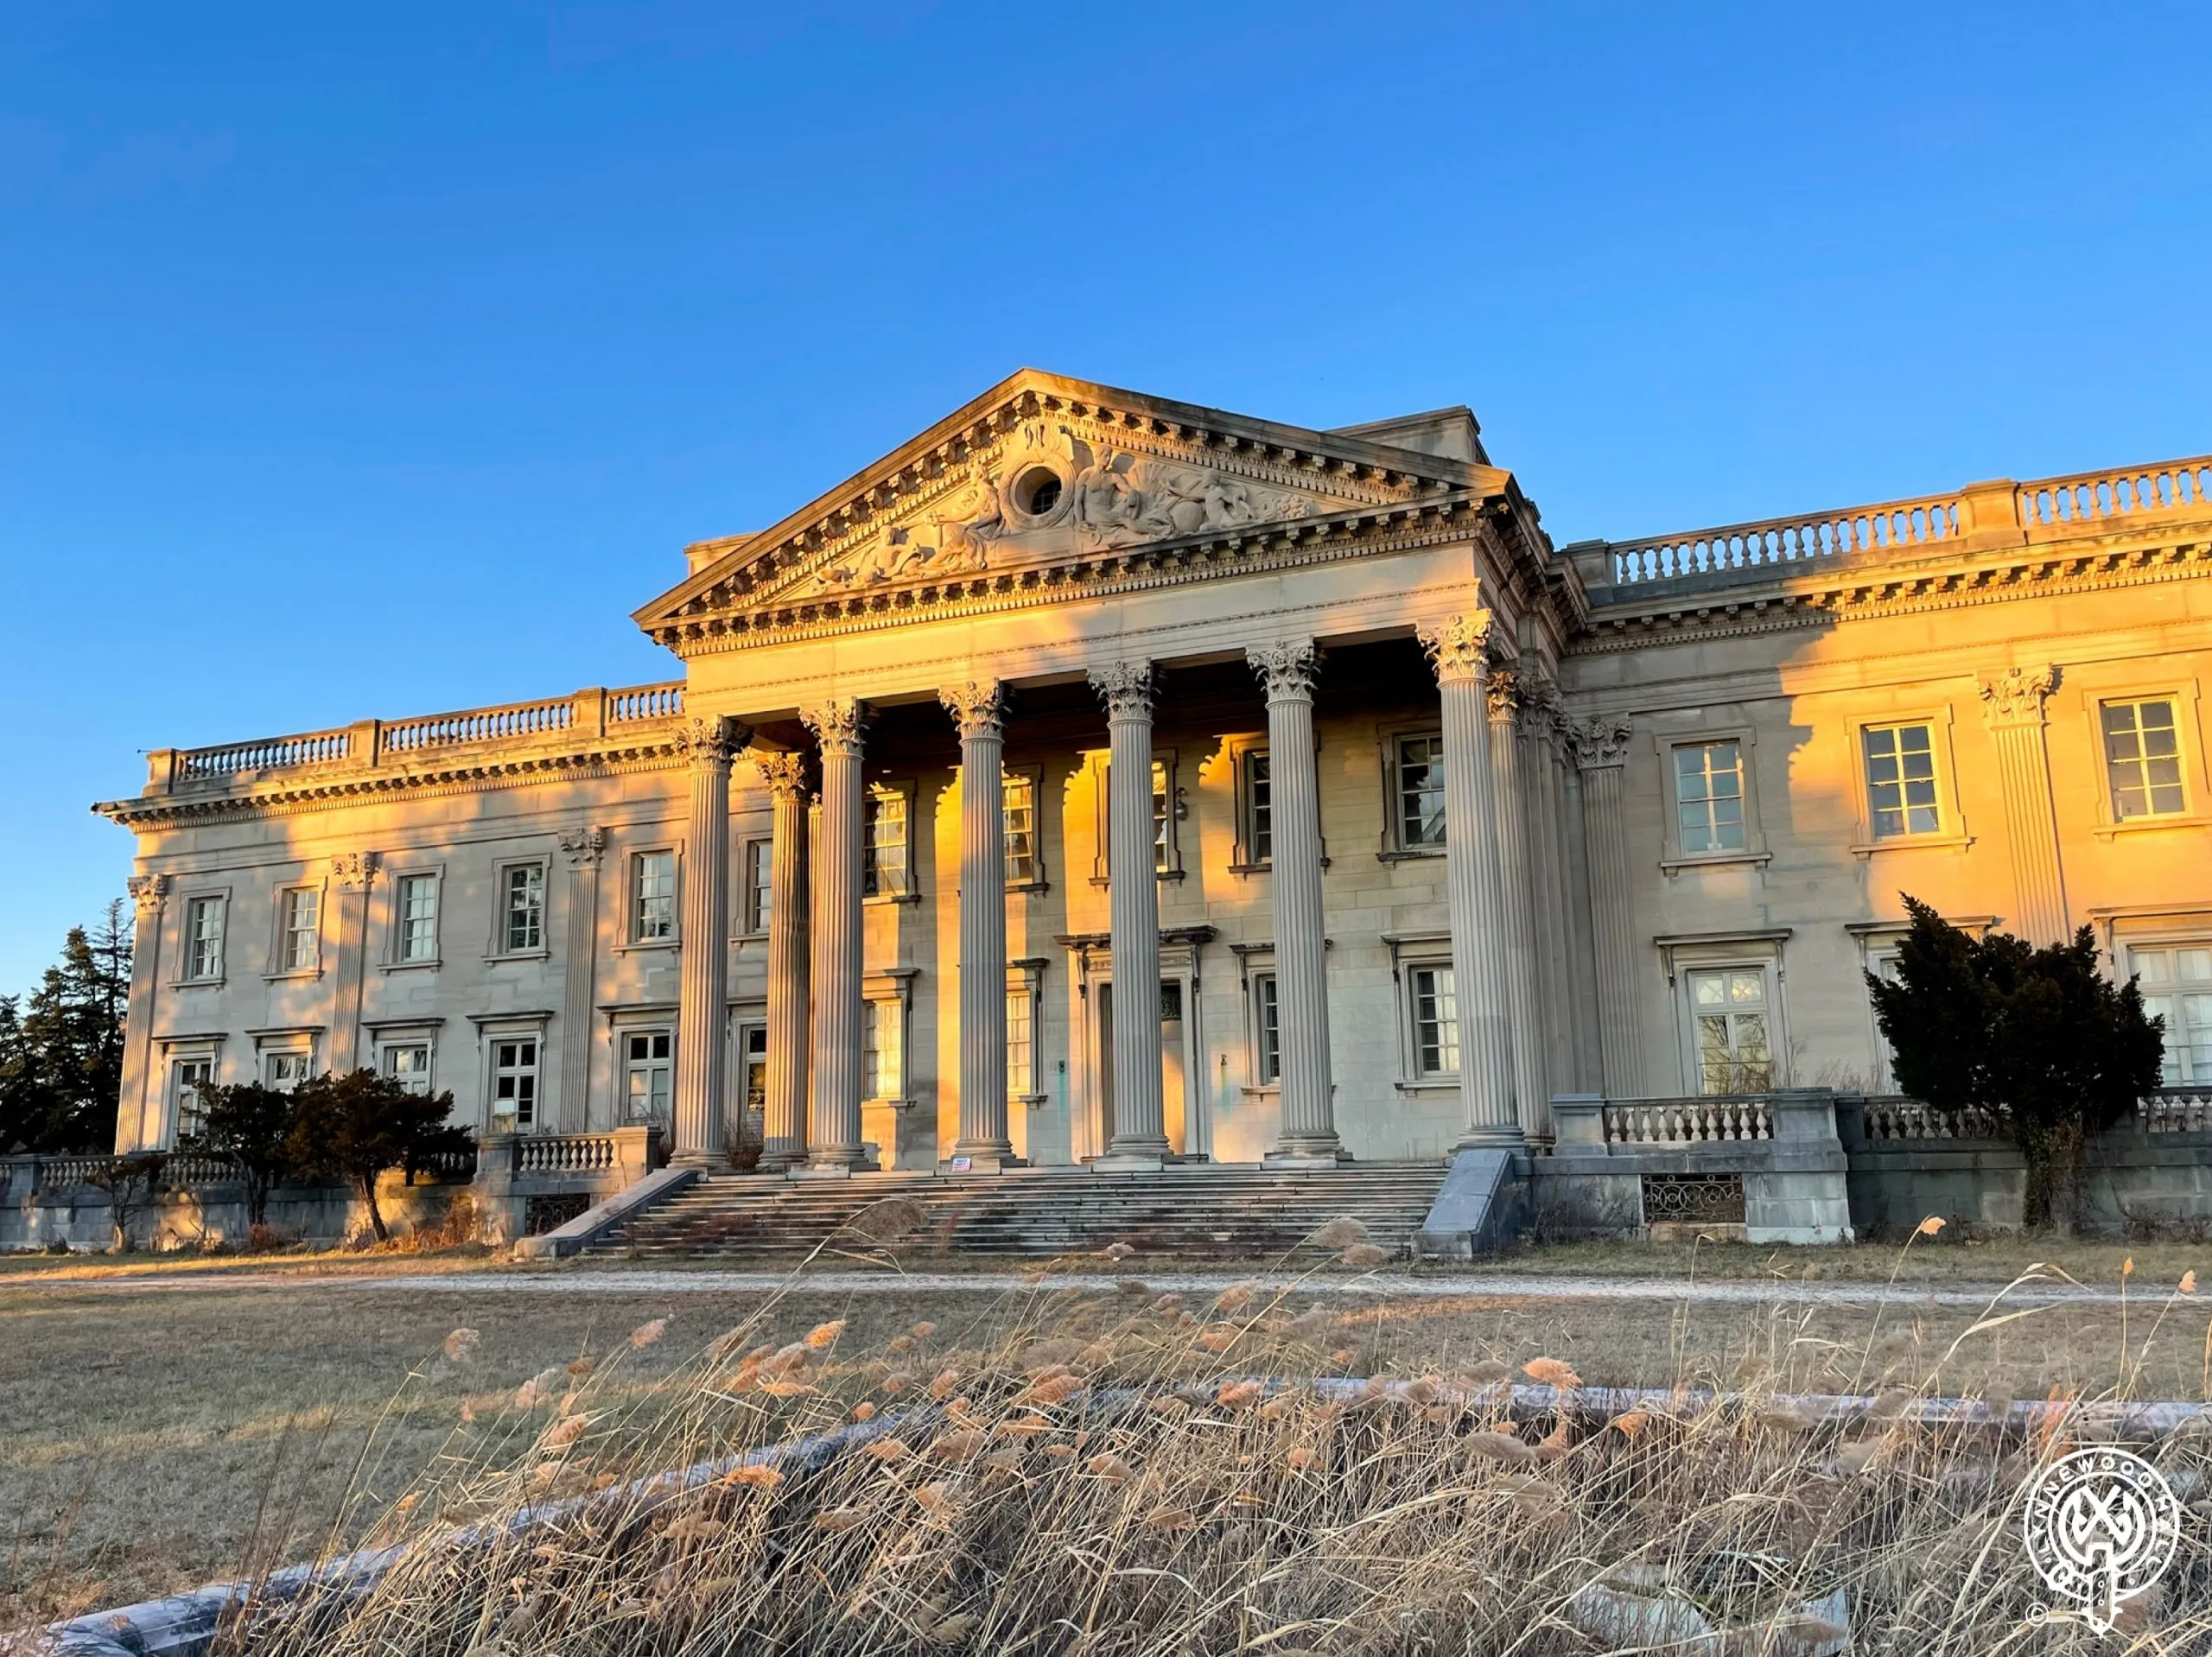 View of front elevation of Lynnewood Hall at early sunset. The stone facade is reflecting the golden sun. In the foreground is tall brown grass and the sky is bright blue.